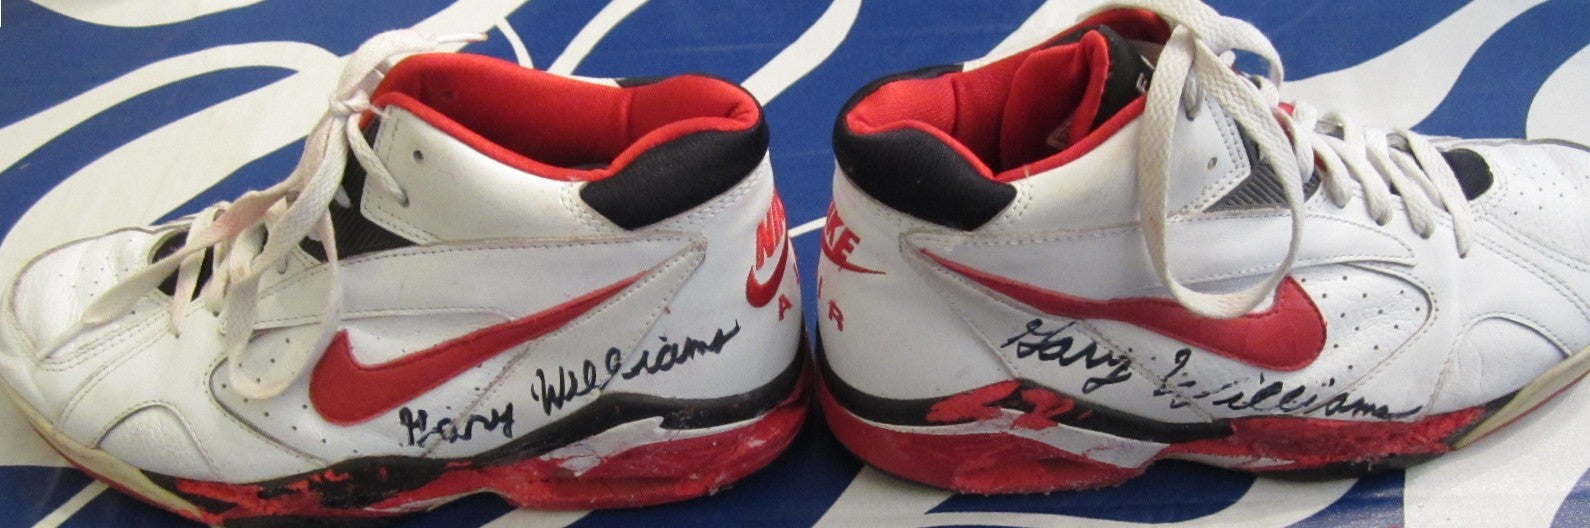 Gary Williams autographed 1994-95 Maryland Terrapins practice worn Nike Air Flight basketball shoes (repaired)